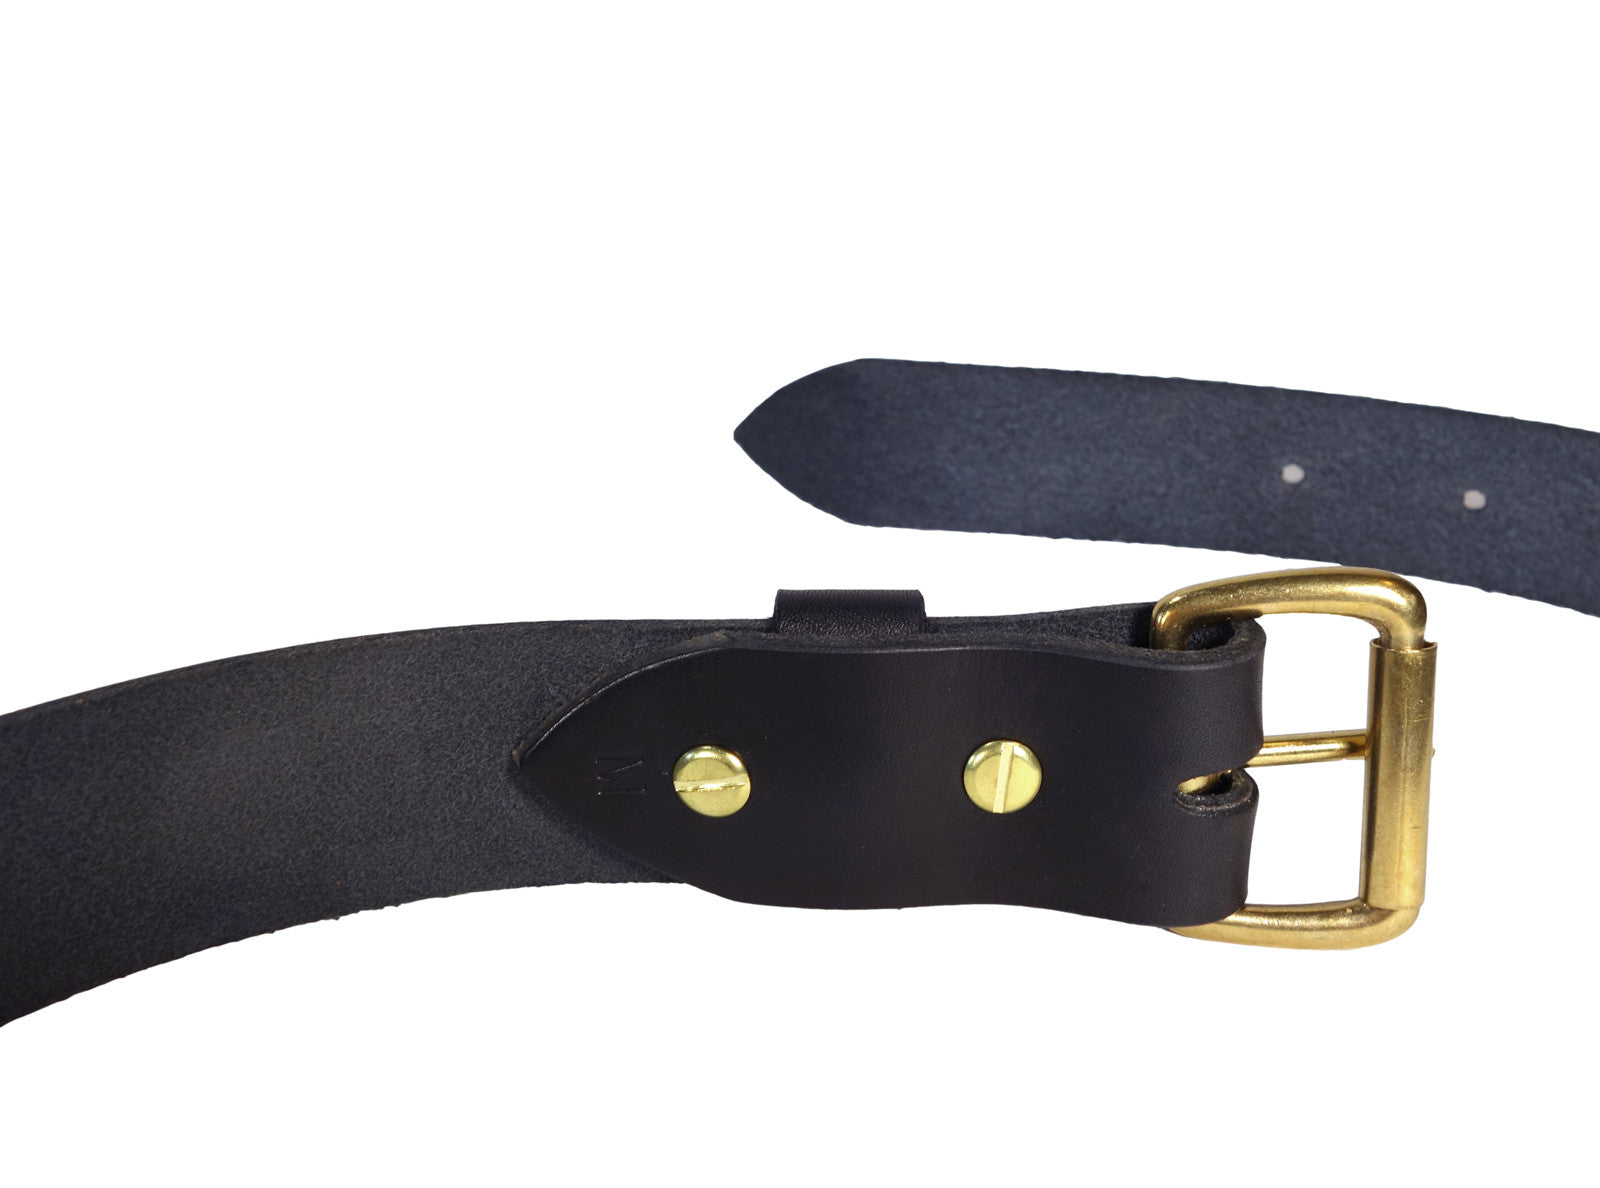 Clouds Black Leather - Collective in Red Belt - the USA - Classic Made